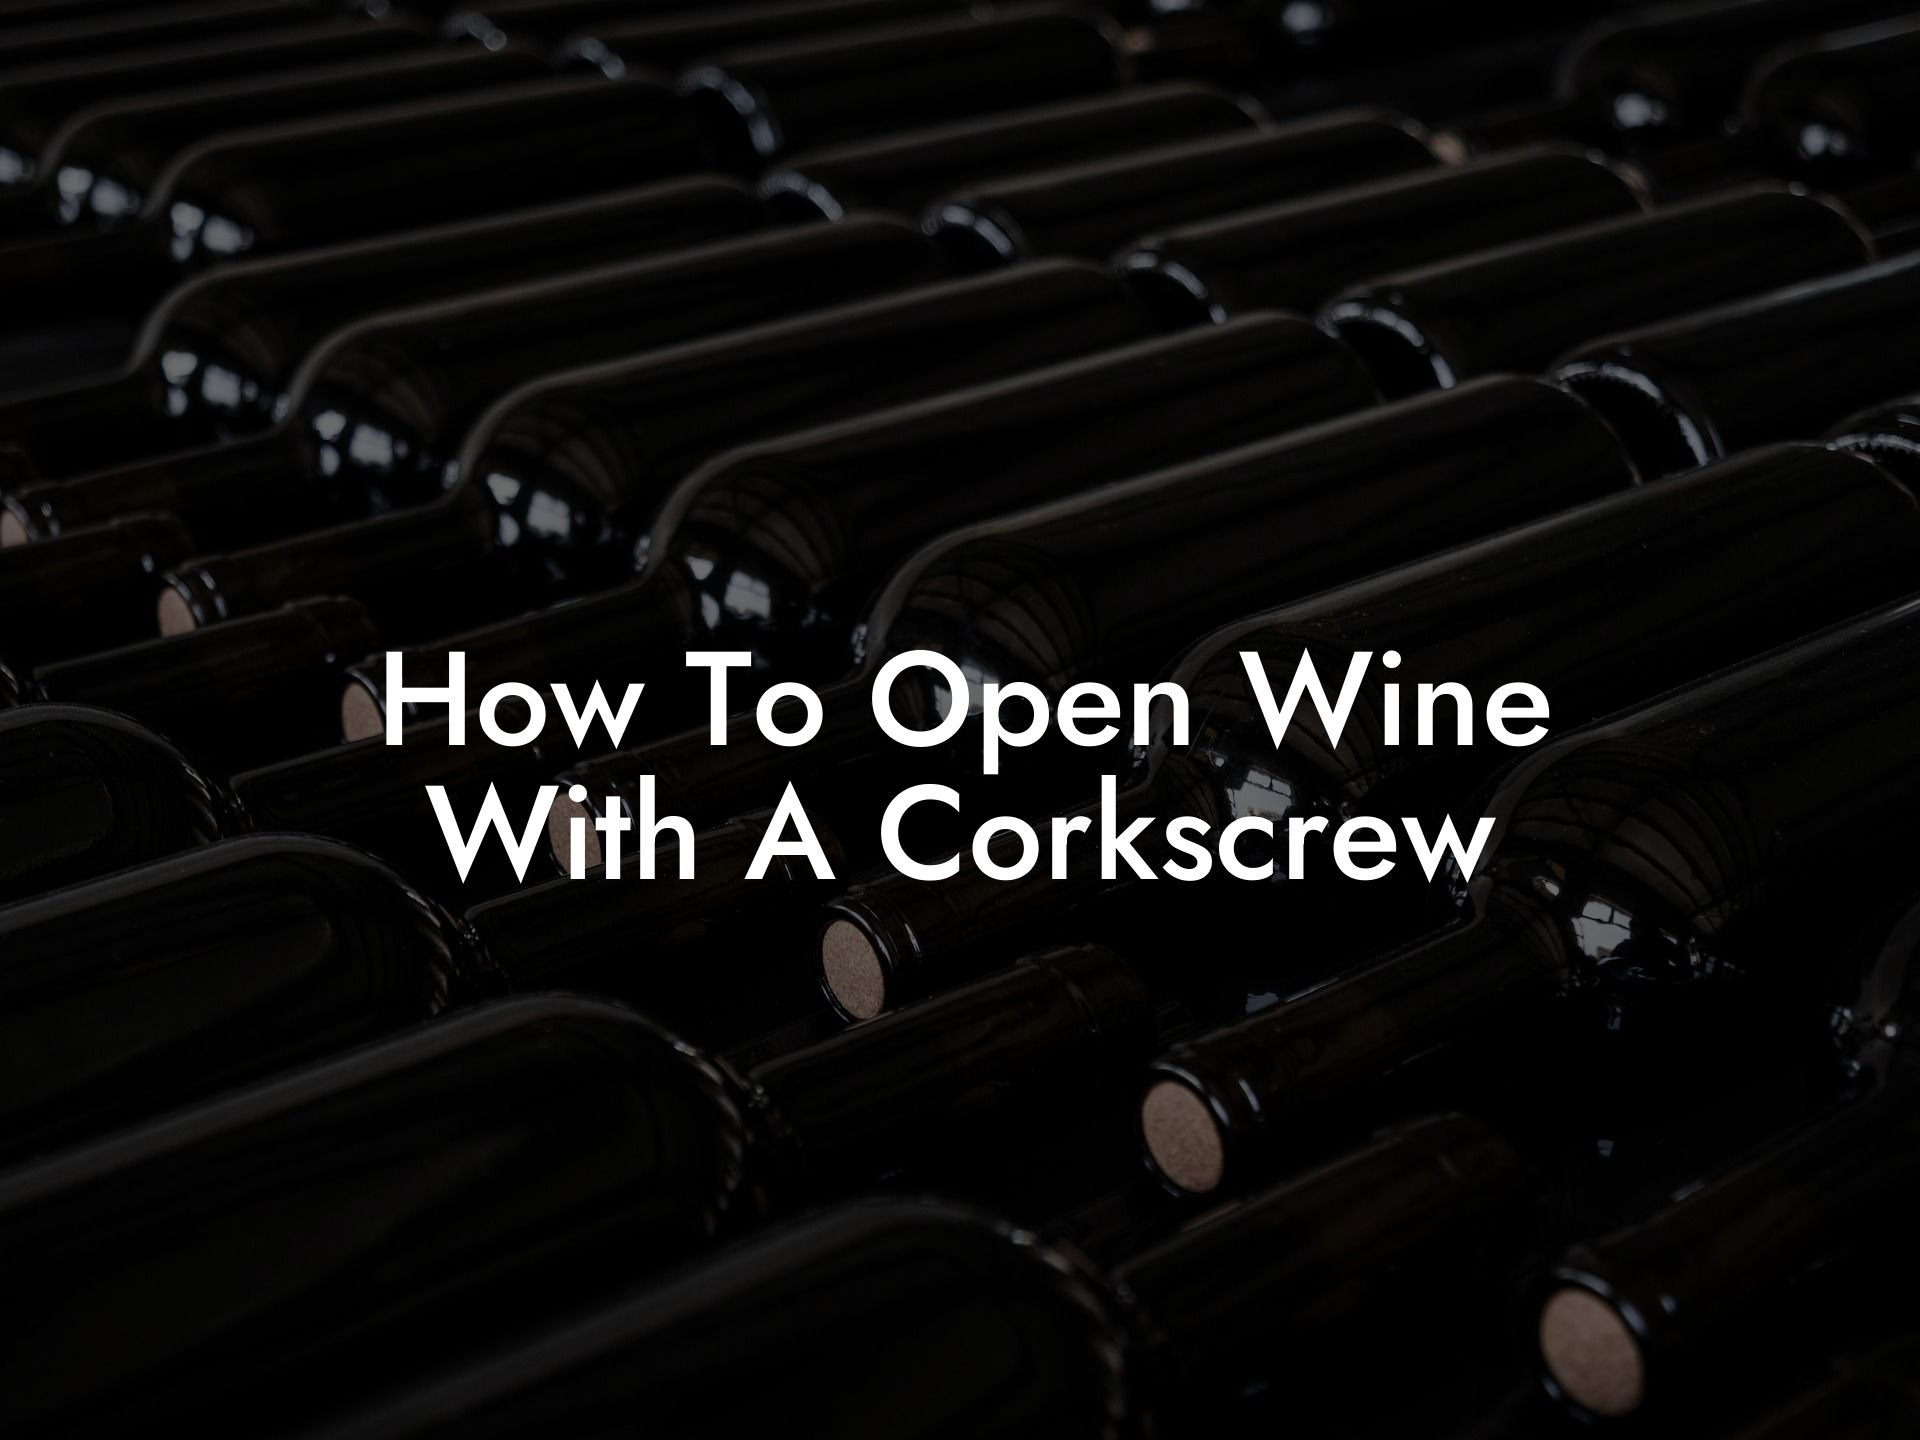 How To Open Wine With A Corkscrew